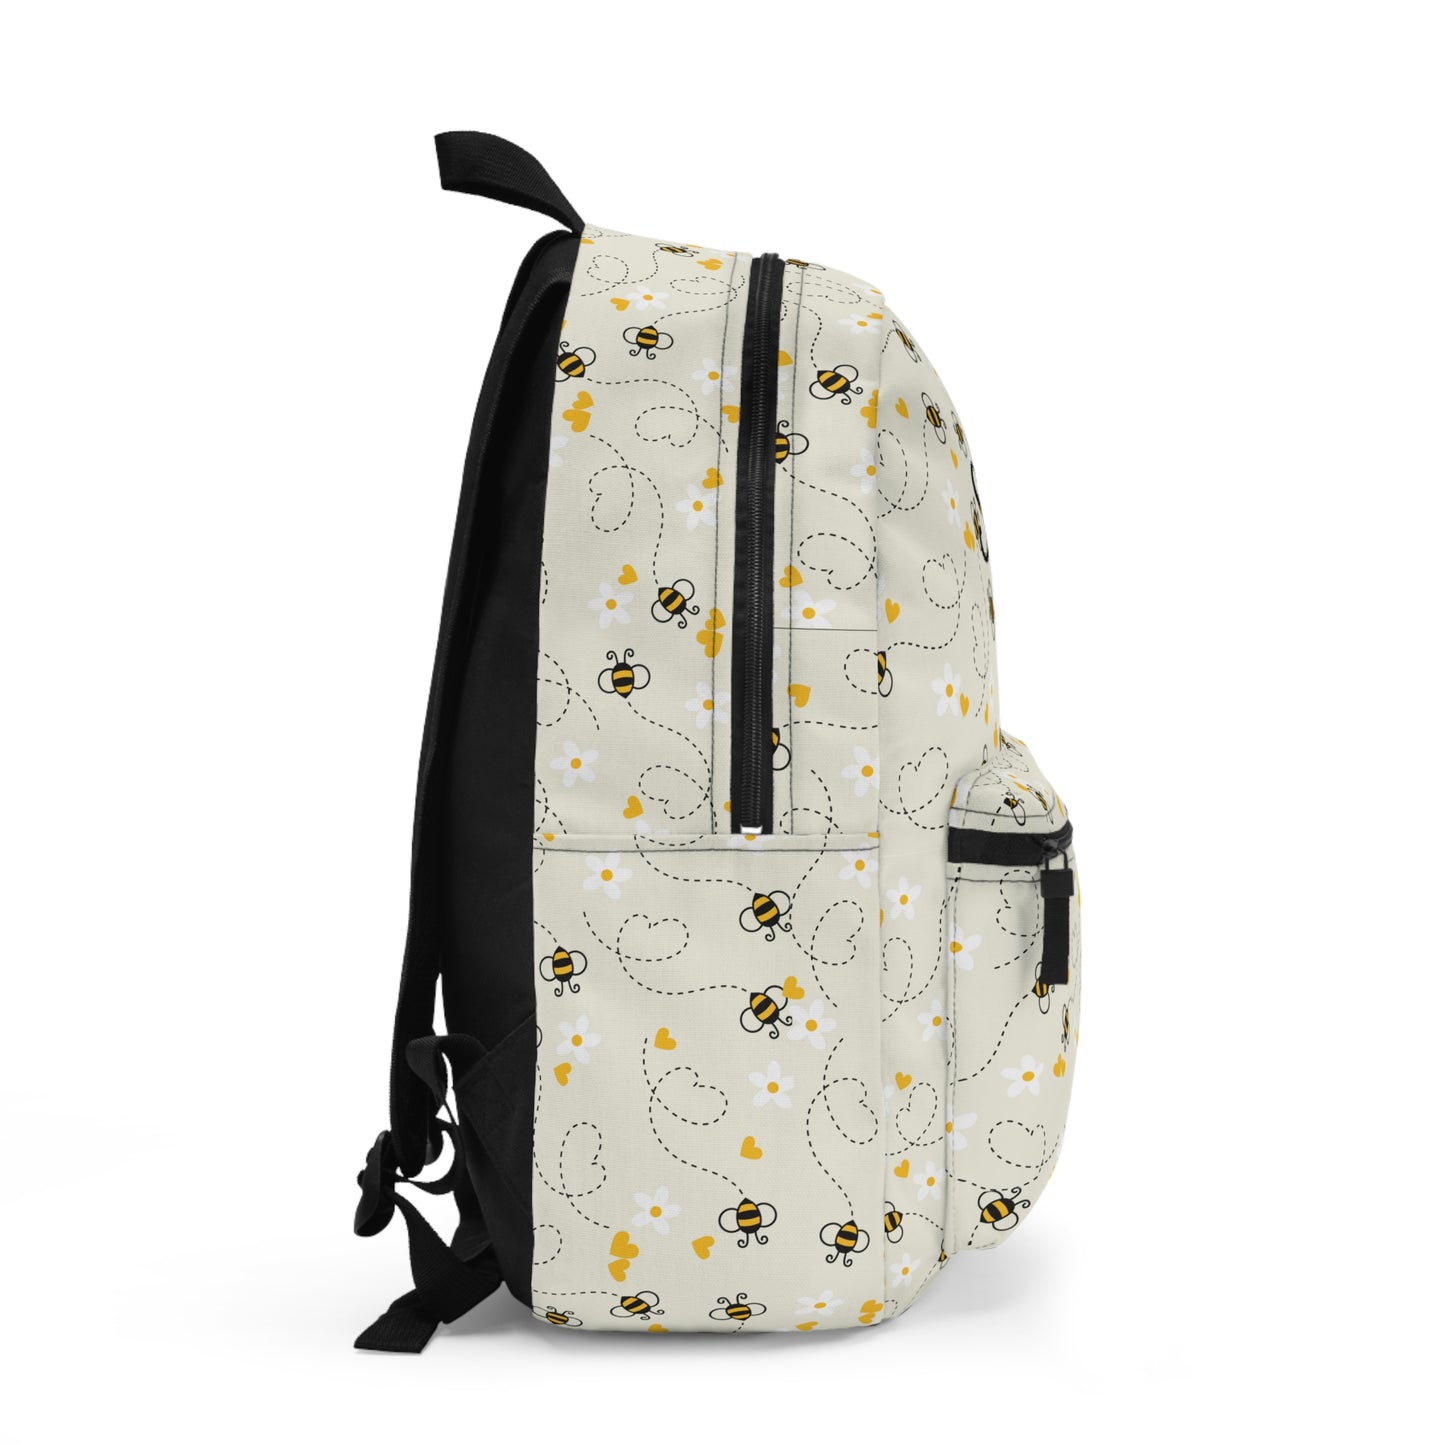 Honey Bee Backpack / Personalized Bee Travel Bag